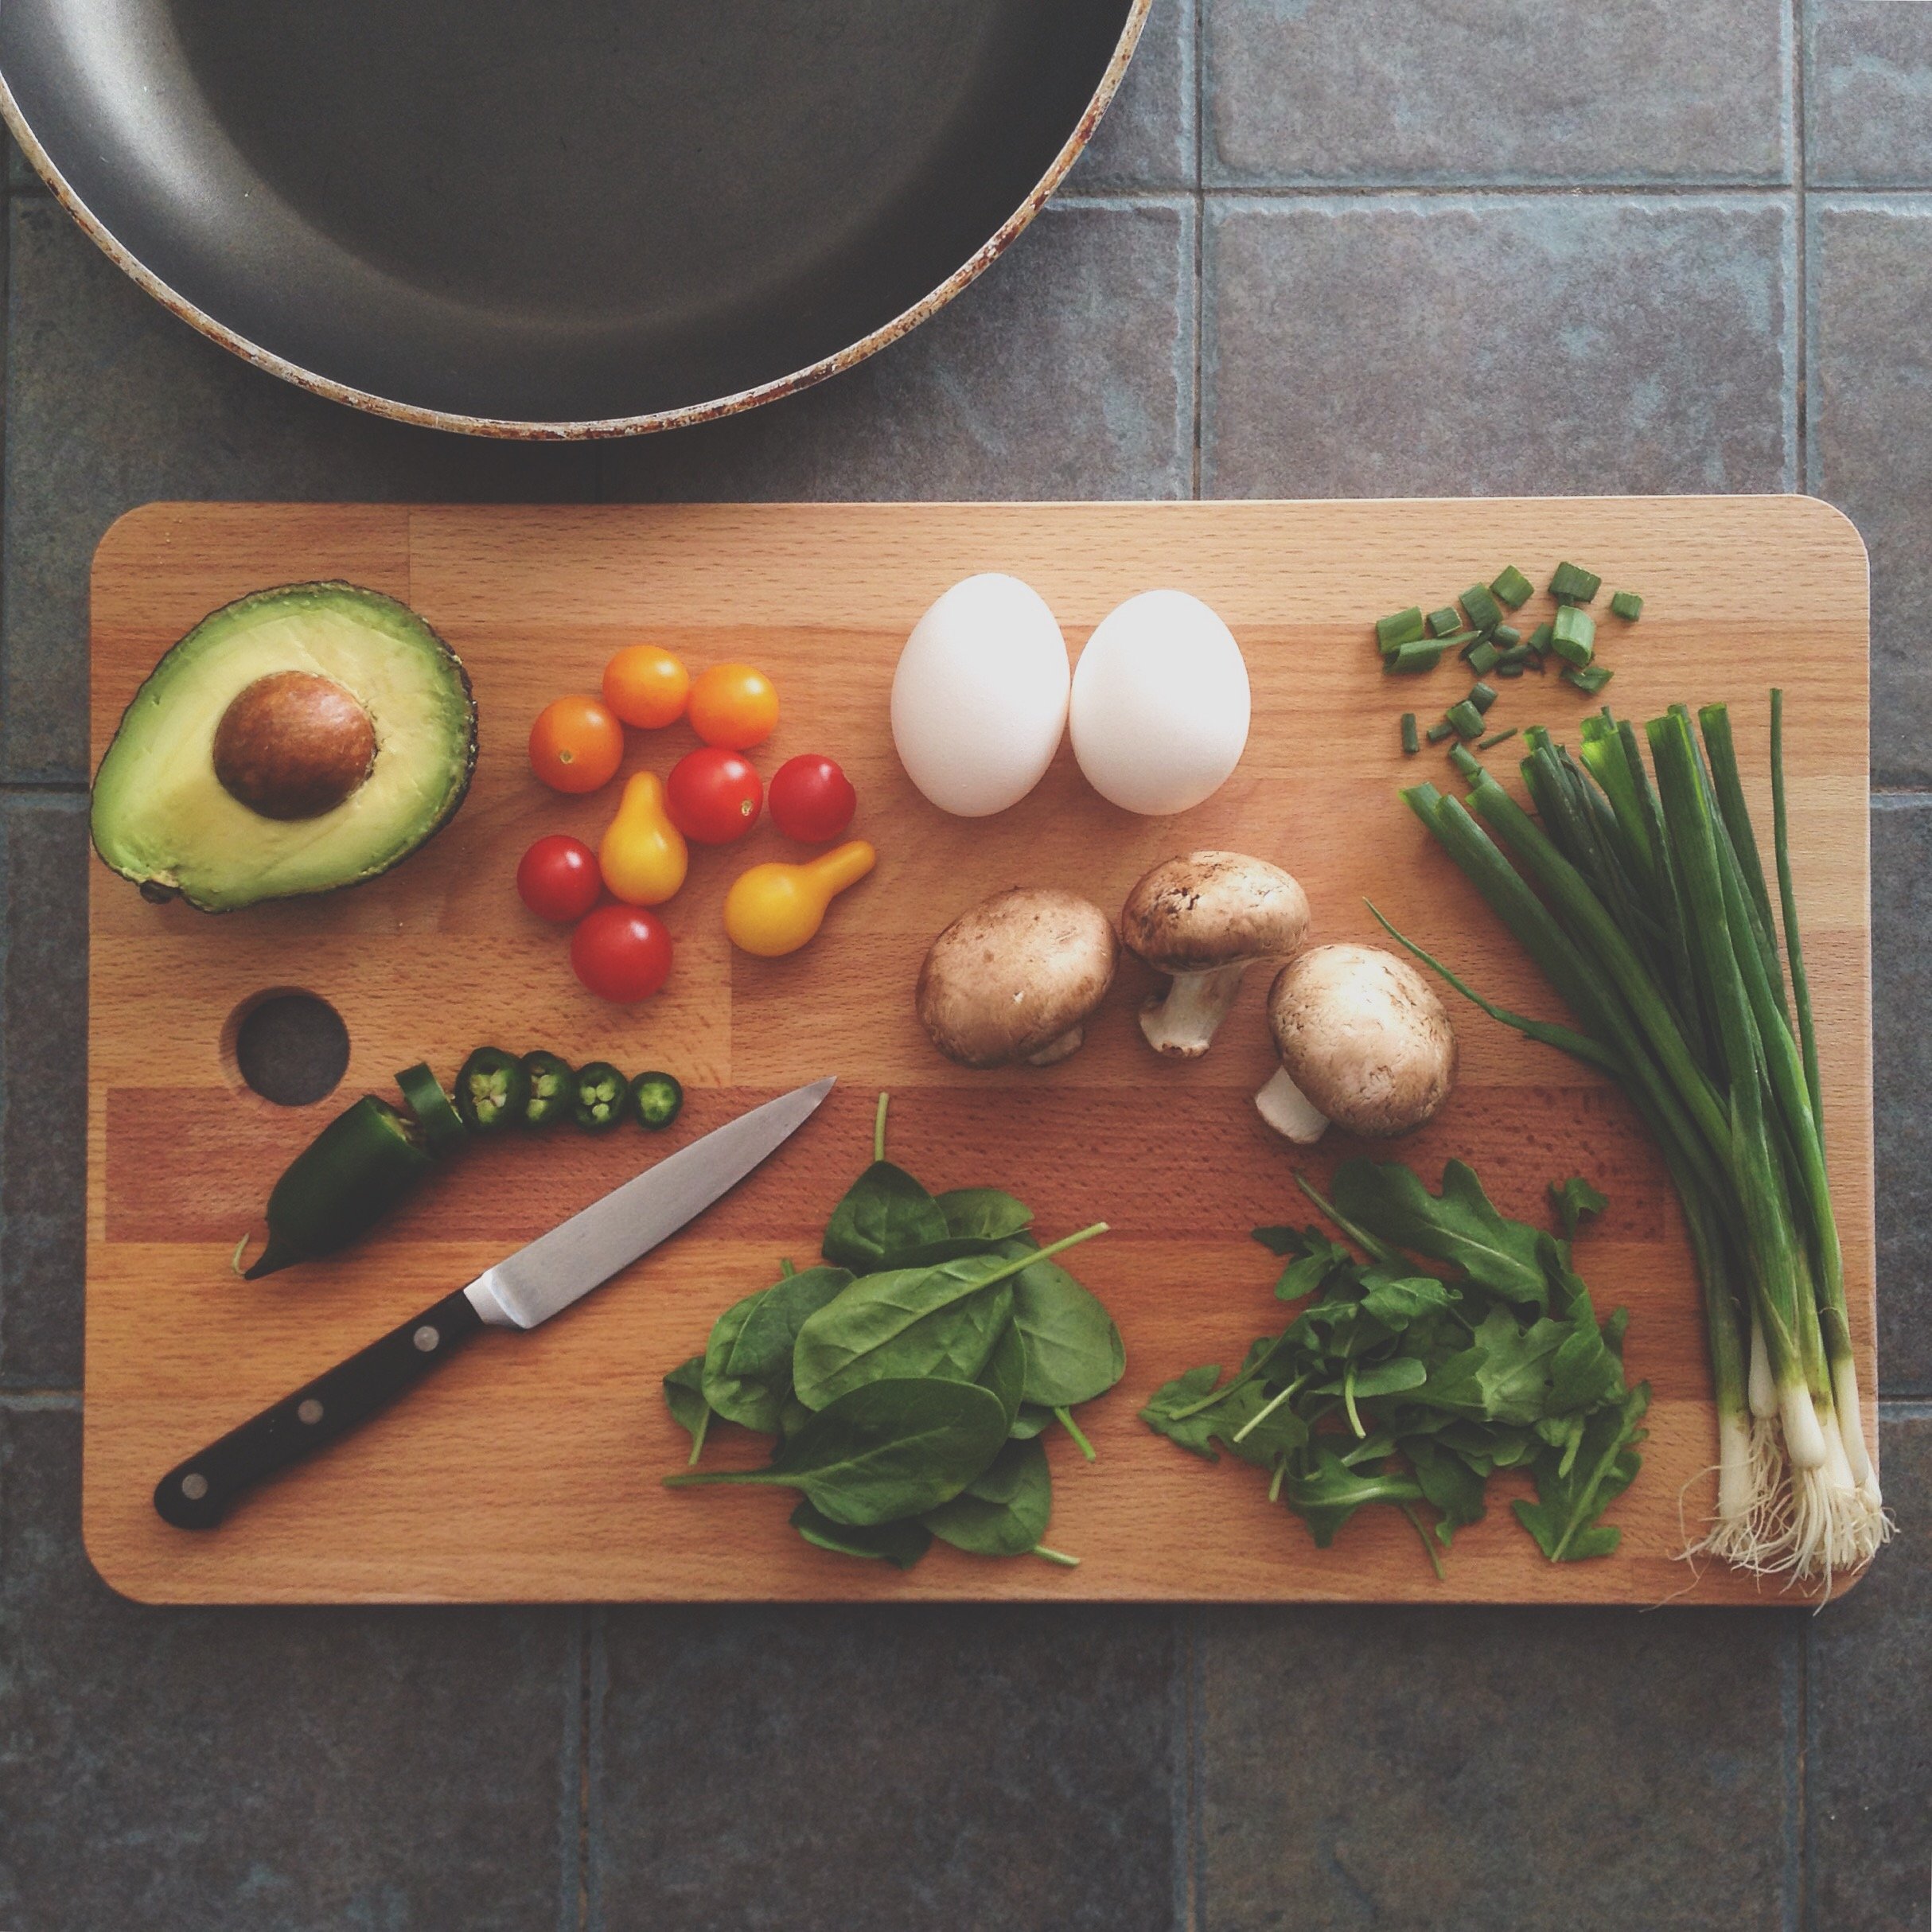 11 Best Non-Toxic Cutting Boards - Candidly Laura